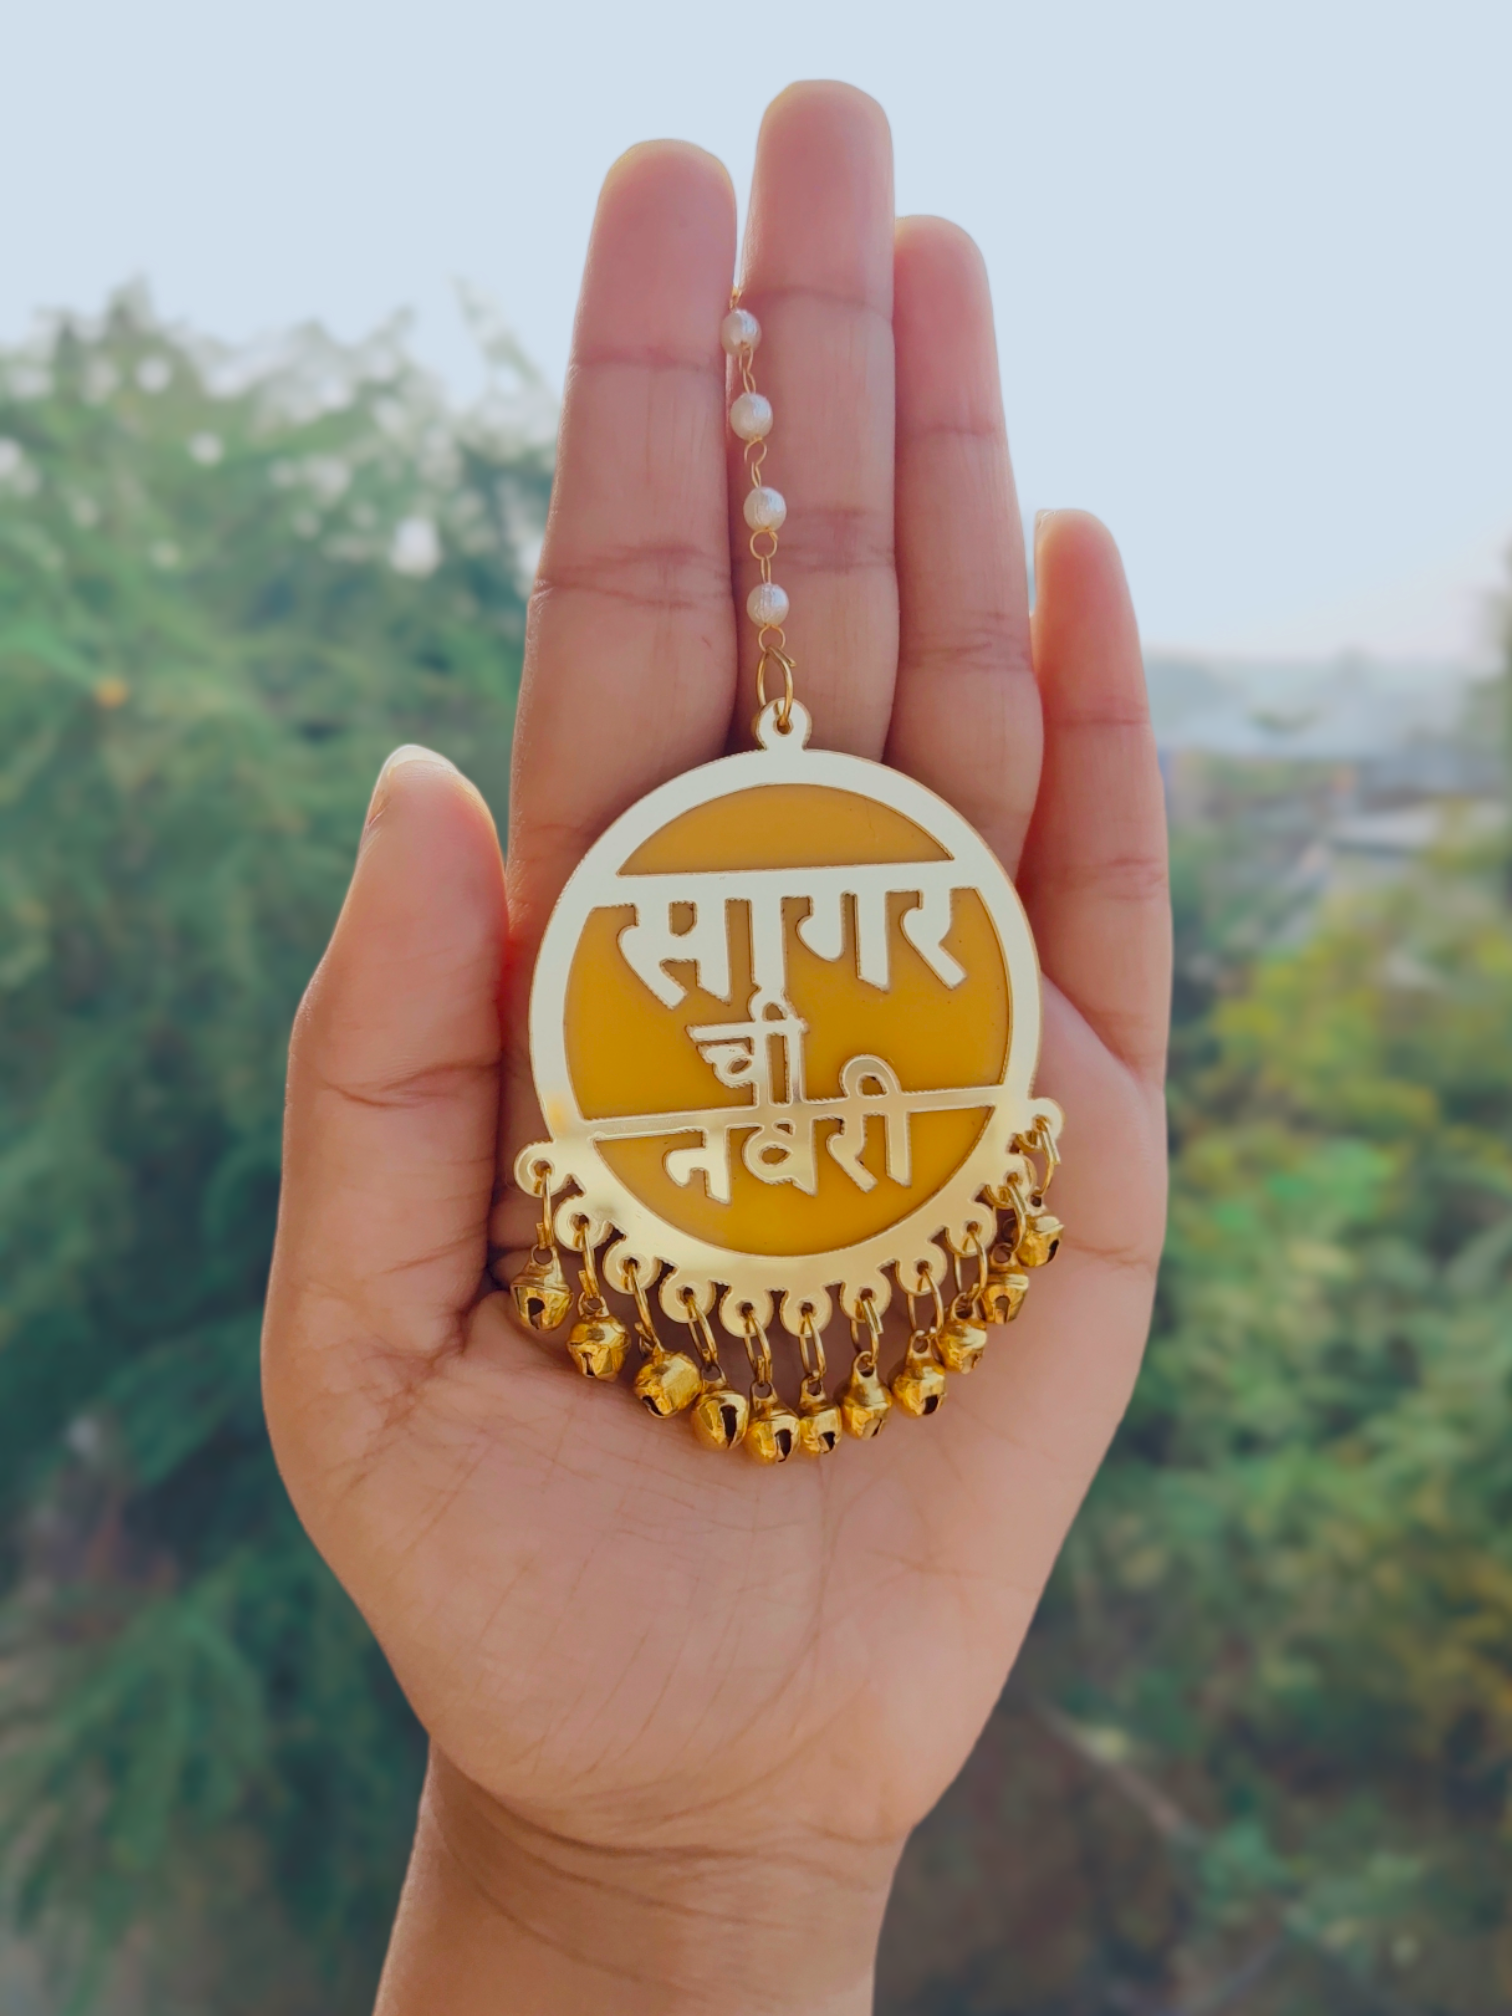 Vibrant yellow Dulhaniya maang tiika capturing intricate detailing and personalized text in Hindi and Marathi, exemplifying superb craftsmanship and cultural opulence